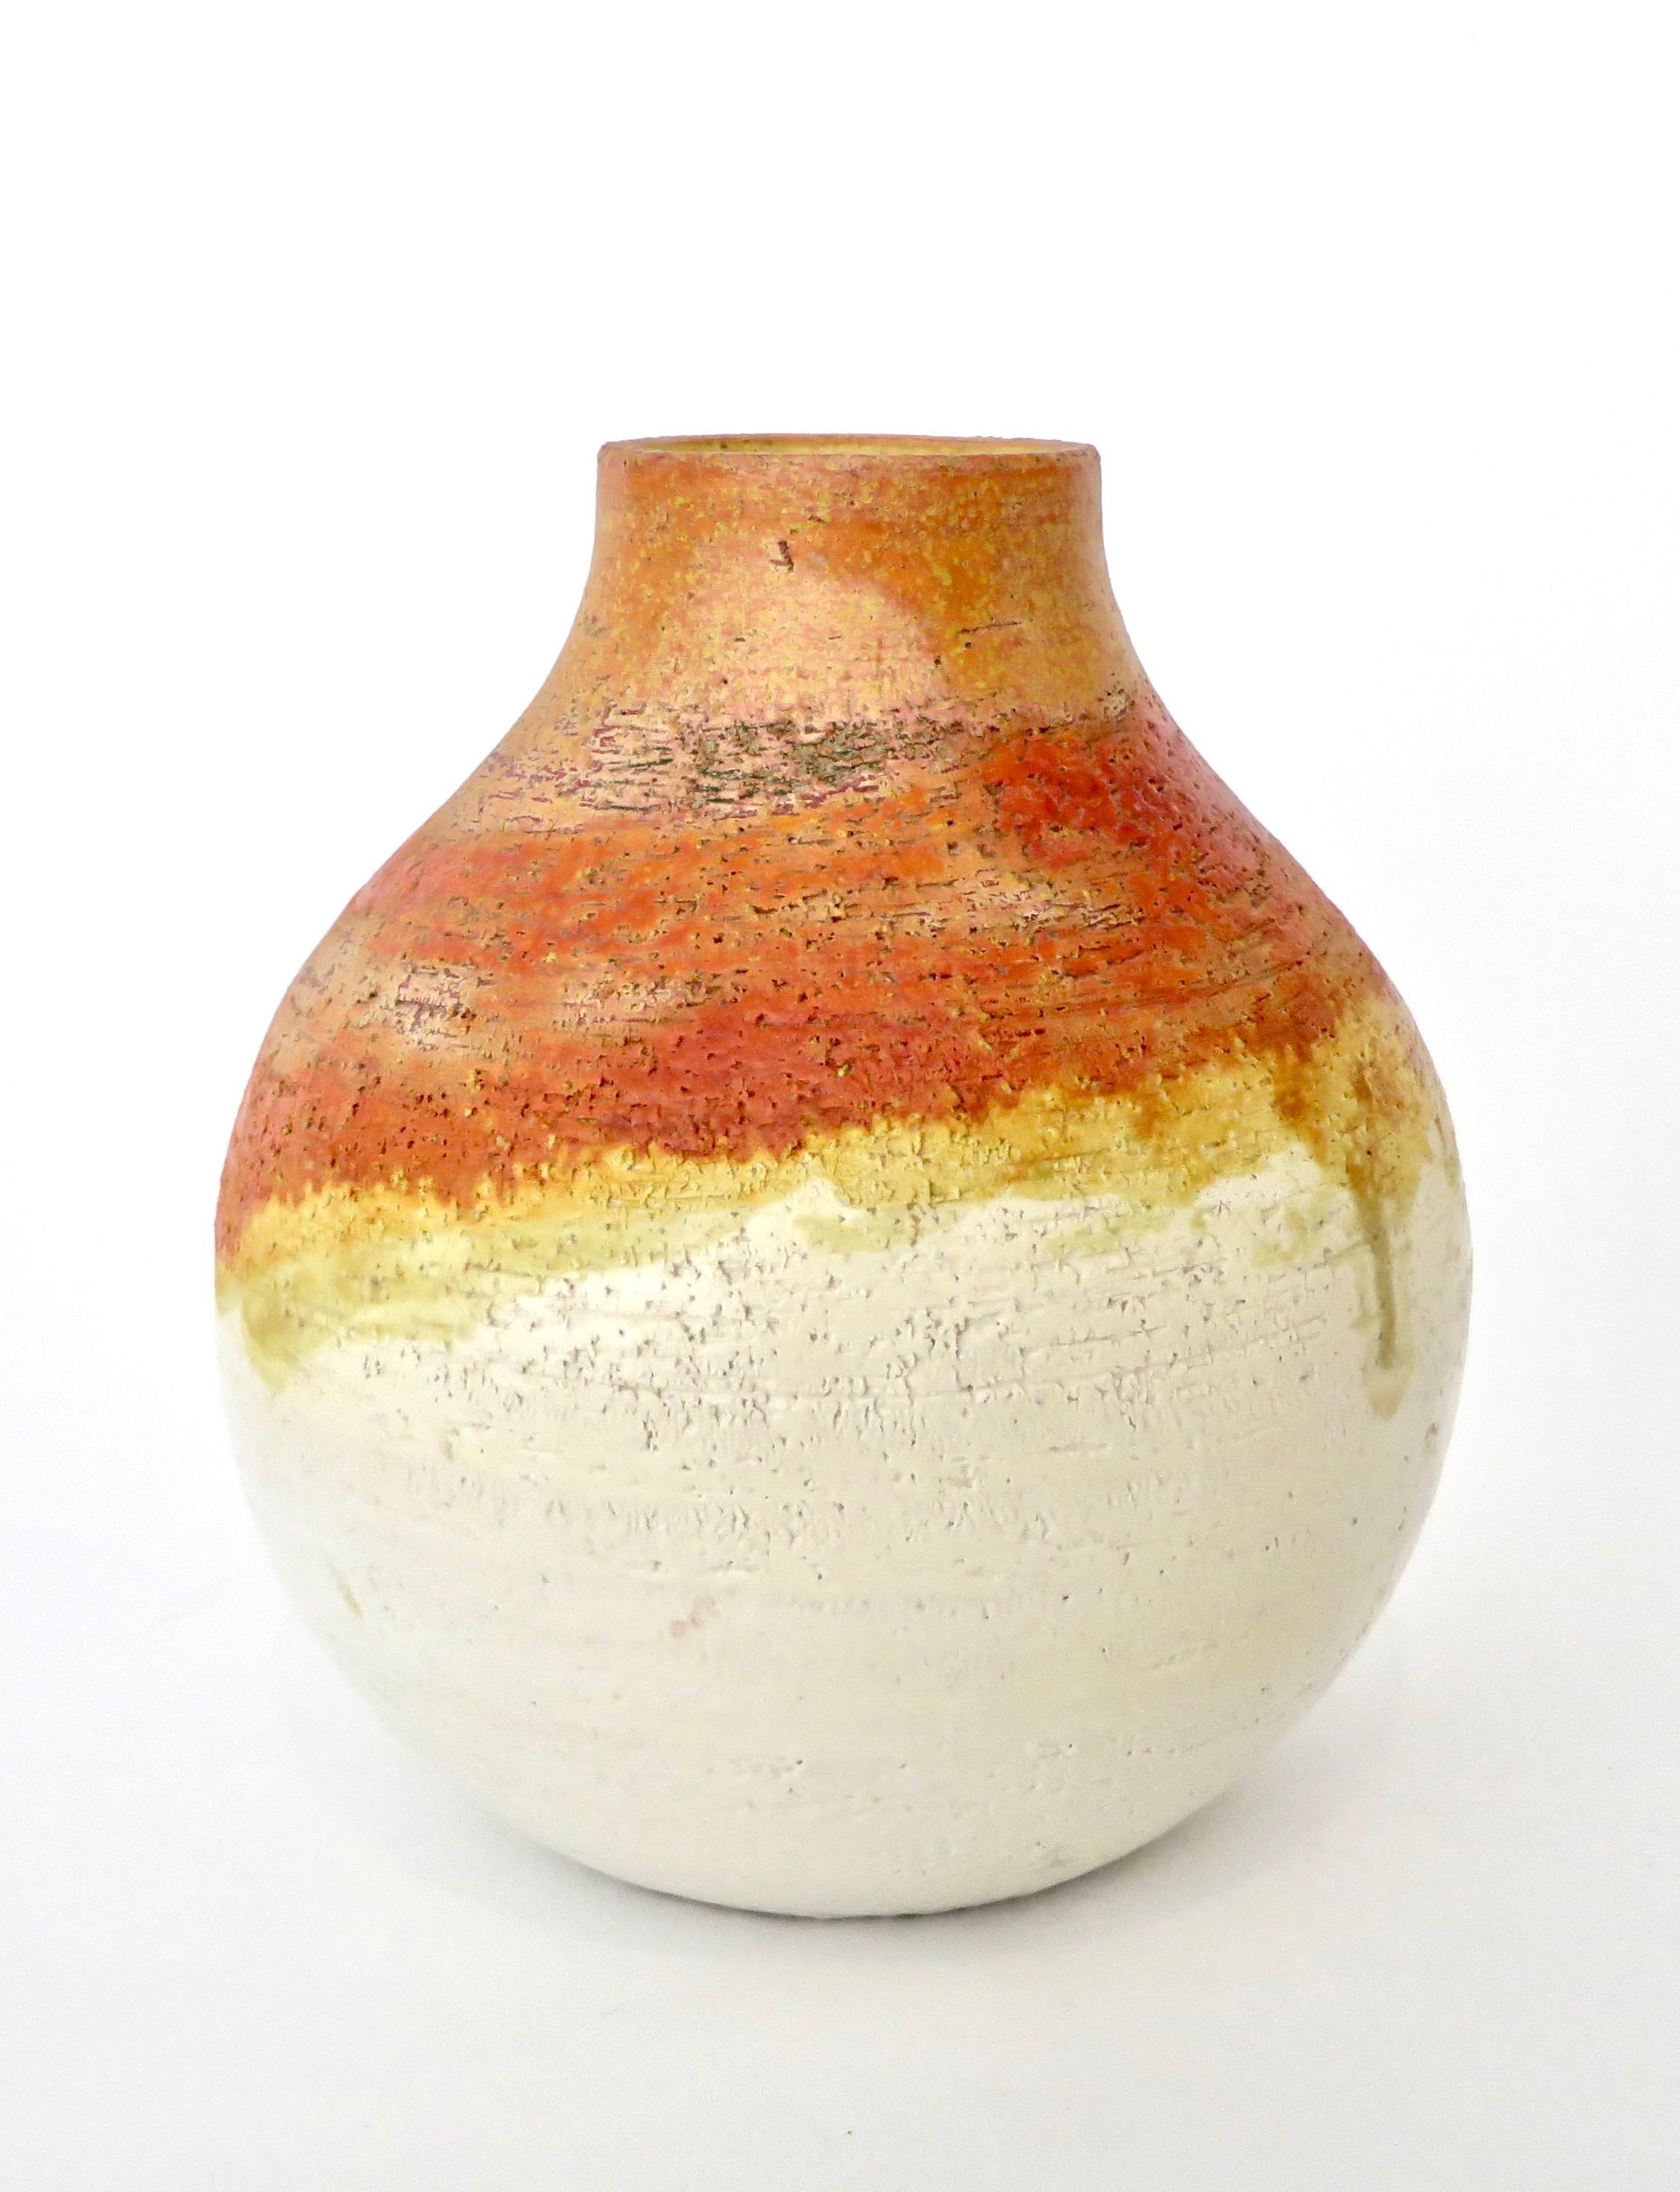 Marcello Fantoni ceramic vessel vase. Signed on bottom Fantoni, Italy.
A generous rounded form with a beautiful orange breaking to yellow and white glaze descending from the neck to white at the bottom.
Please look at the entire collection in the